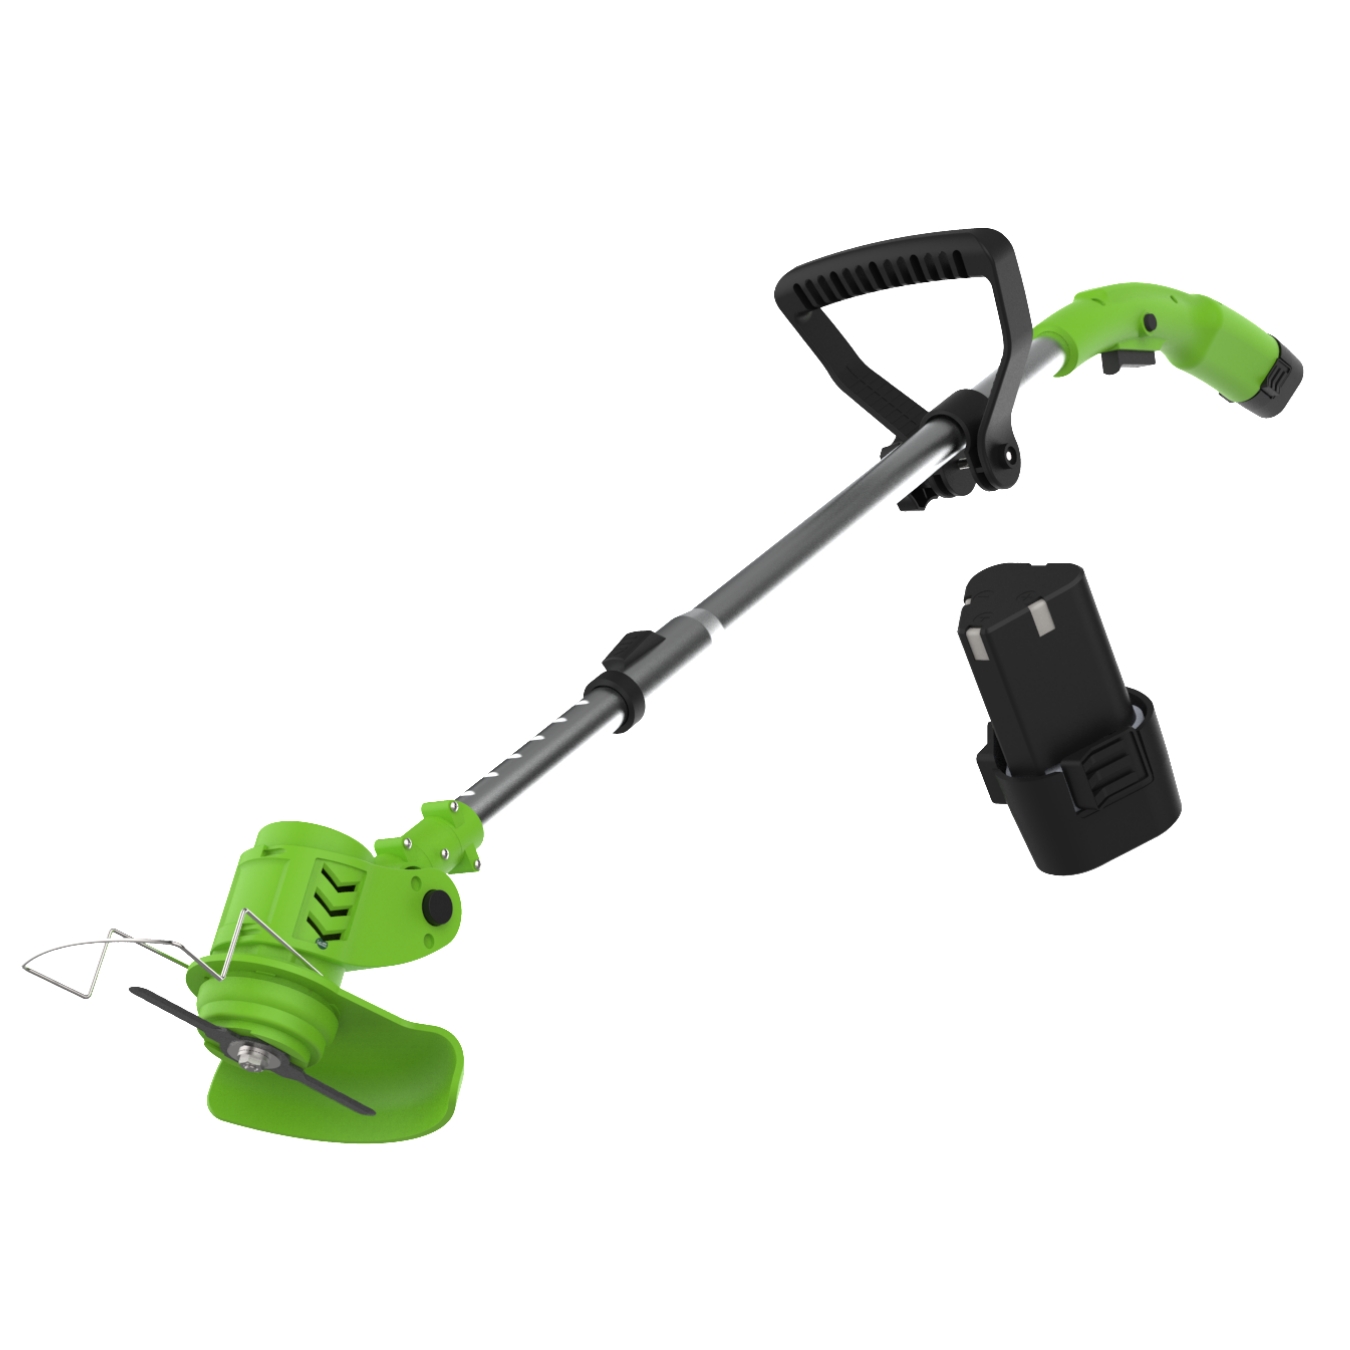 An image of Lawn Barber 2-in-1 Trimmer and Edger + Additional Battery